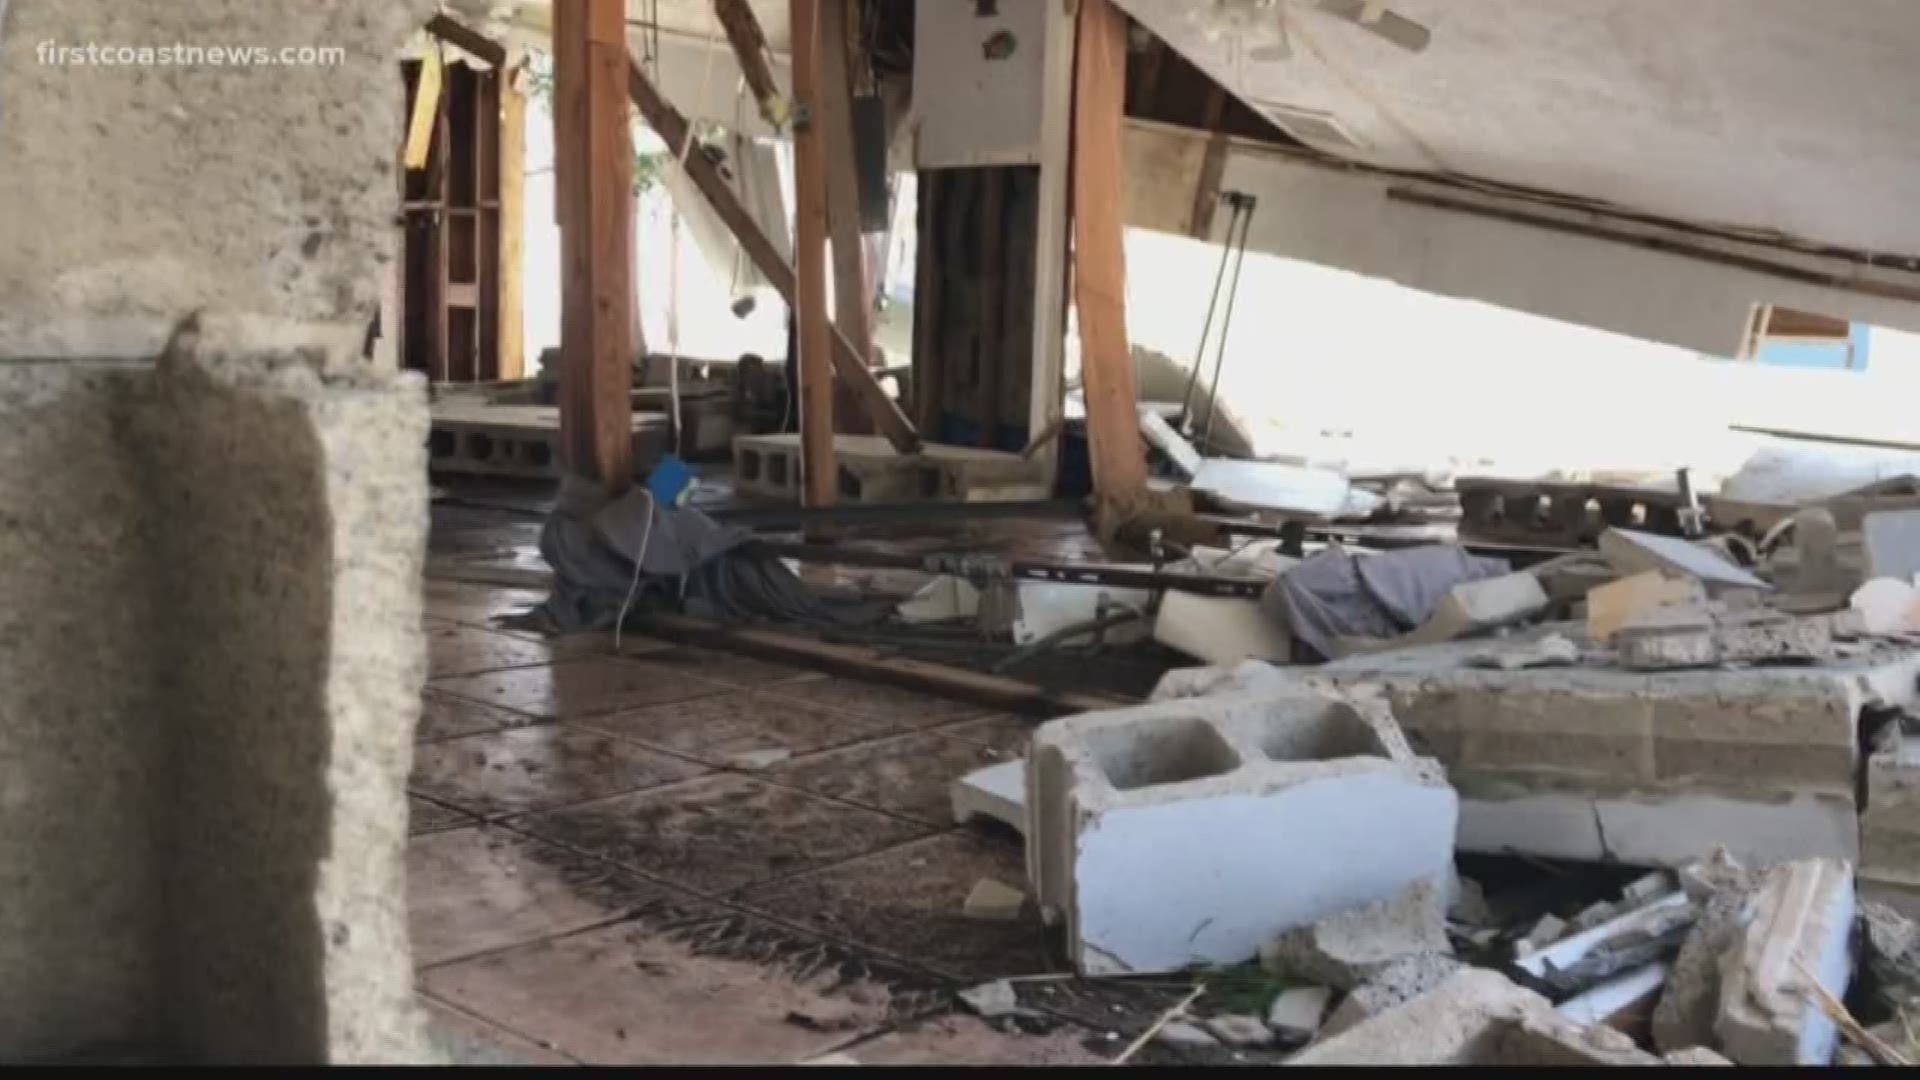 With cleanup efforts underway in Carrabelle, FL families are left figuring out which homes can be saved and which are a total loss.